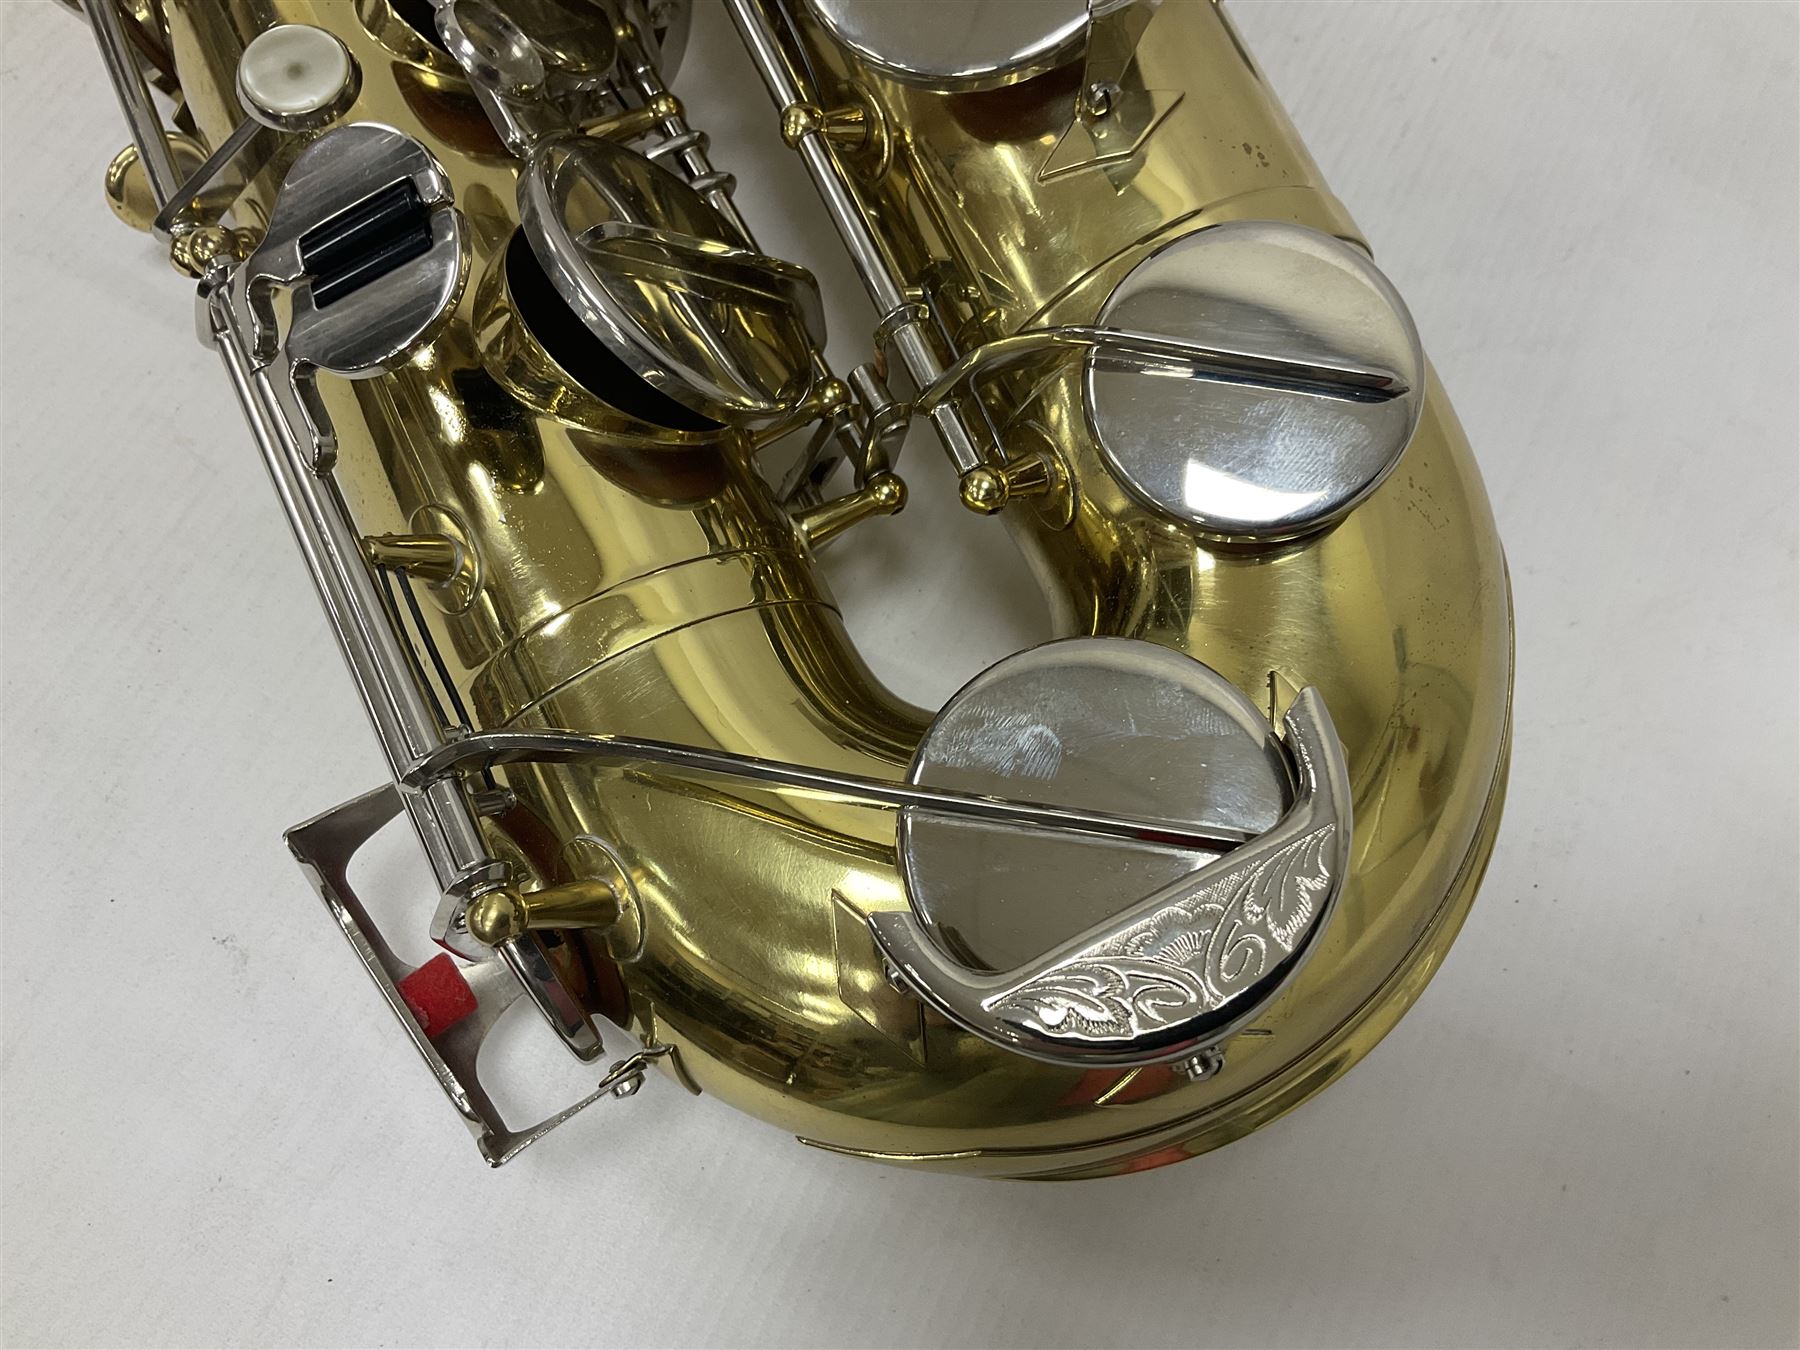 Lafleur by Boosey & Hawkes student tenor saxophone in fitted case with accessories - Image 10 of 29